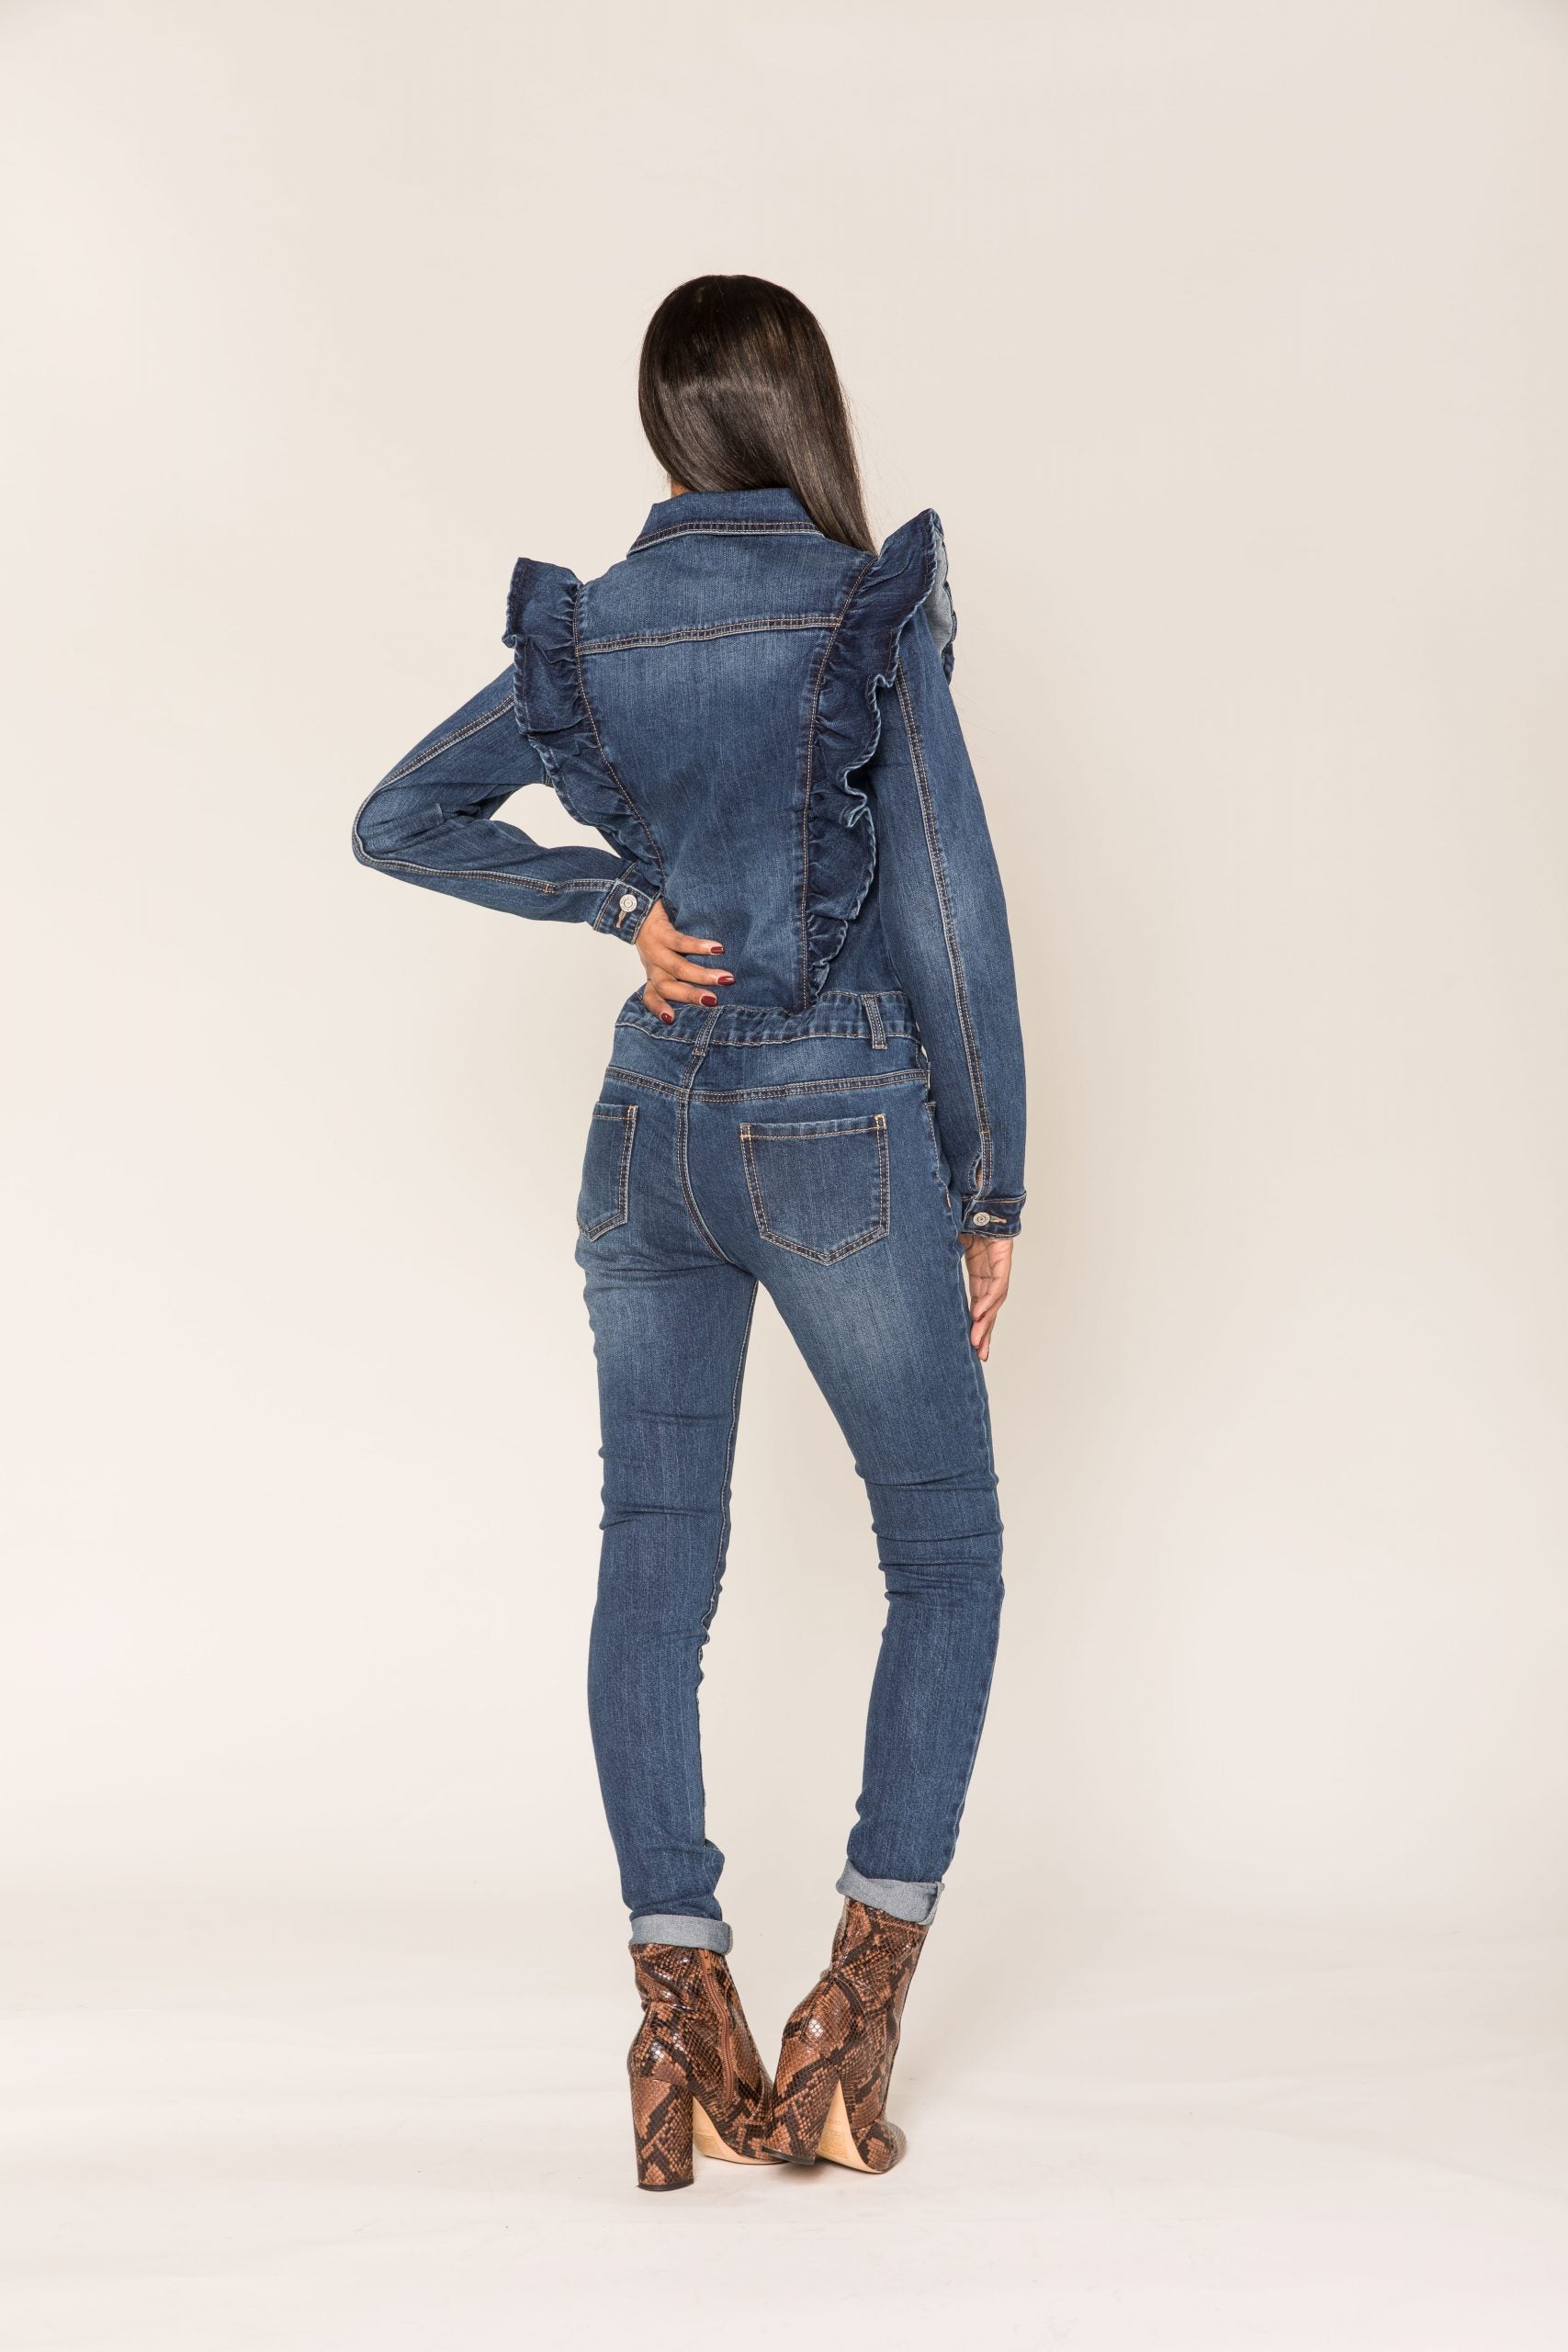 custom clothing manufacturers; high quality boutique wholesale clothing; denim wholesaler; boohoo suppliers list; wholesale womens clothing; manufacturing clothing uk; clothing vendors; wholesale clothing suppliers; buy clothes in bulk; fashion nova wholesale; wholesale clothing online; bulk clothing for sale; british clothing manufacturer; wholesale fashion